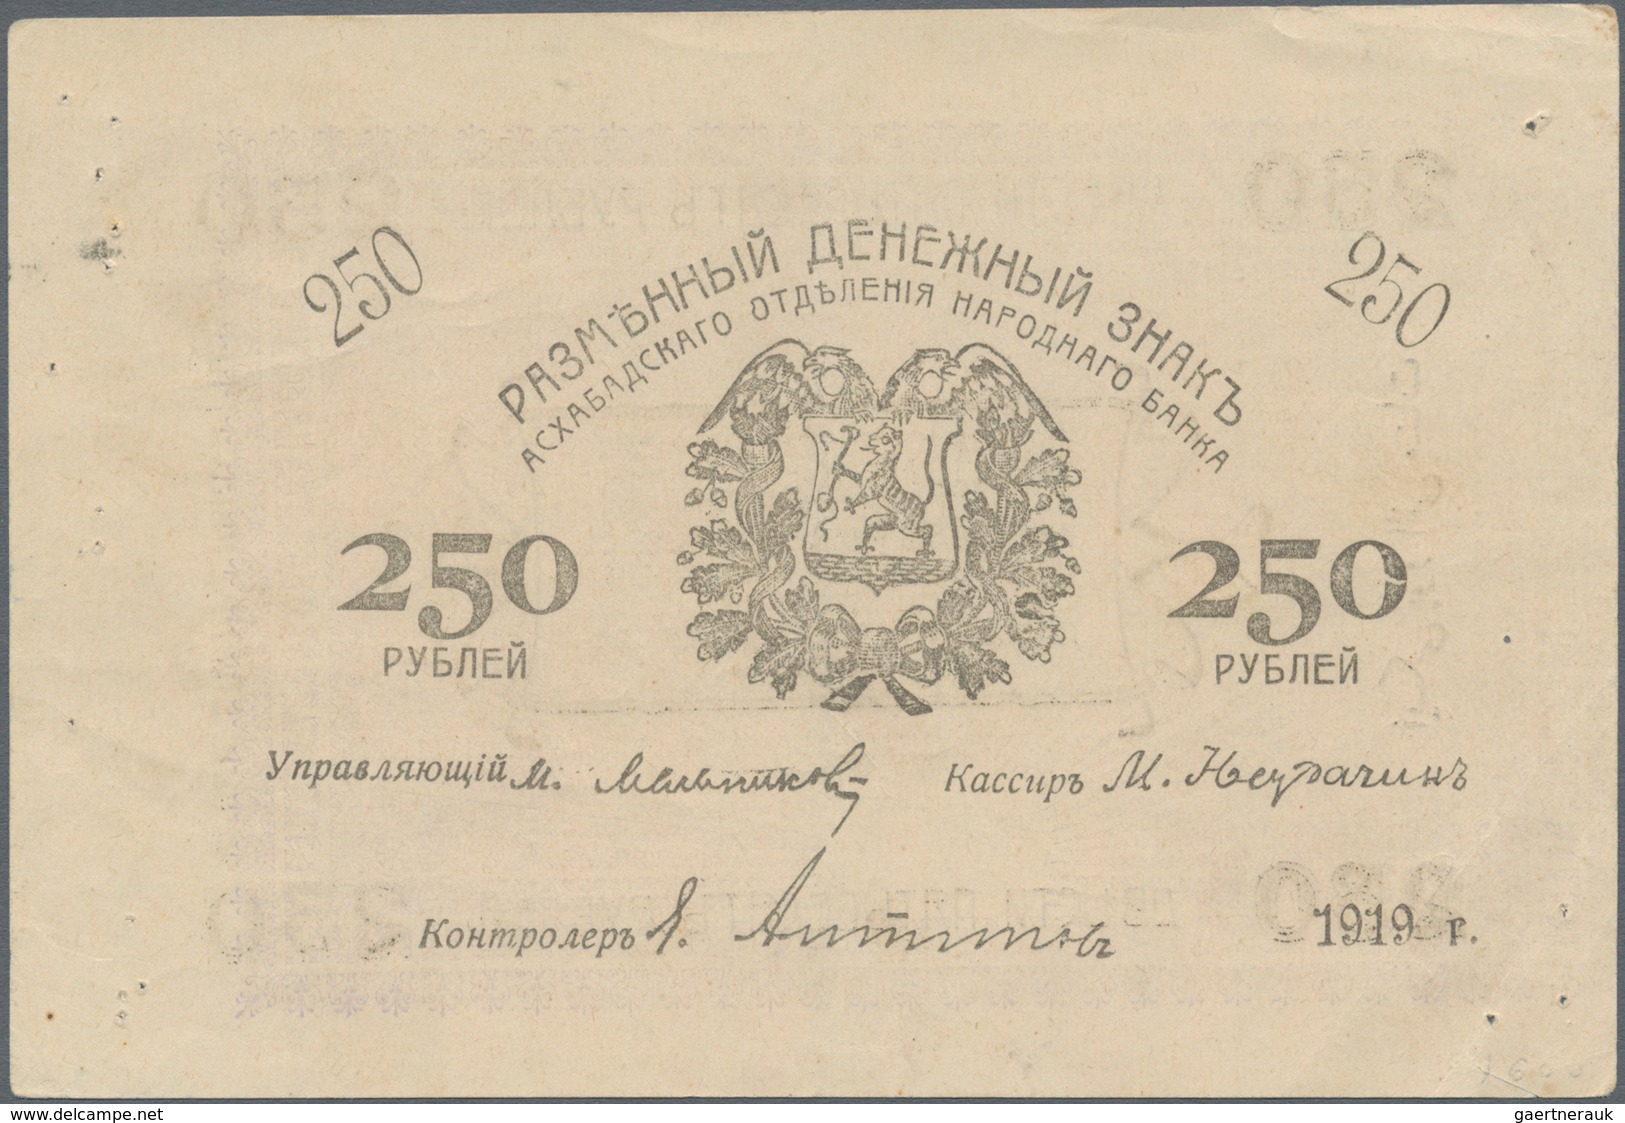 Russia / Russland: Central Asia – Ashkhabad 250 Rubles 1919, P.S1146 Without Underprint Color. Condi - Russland